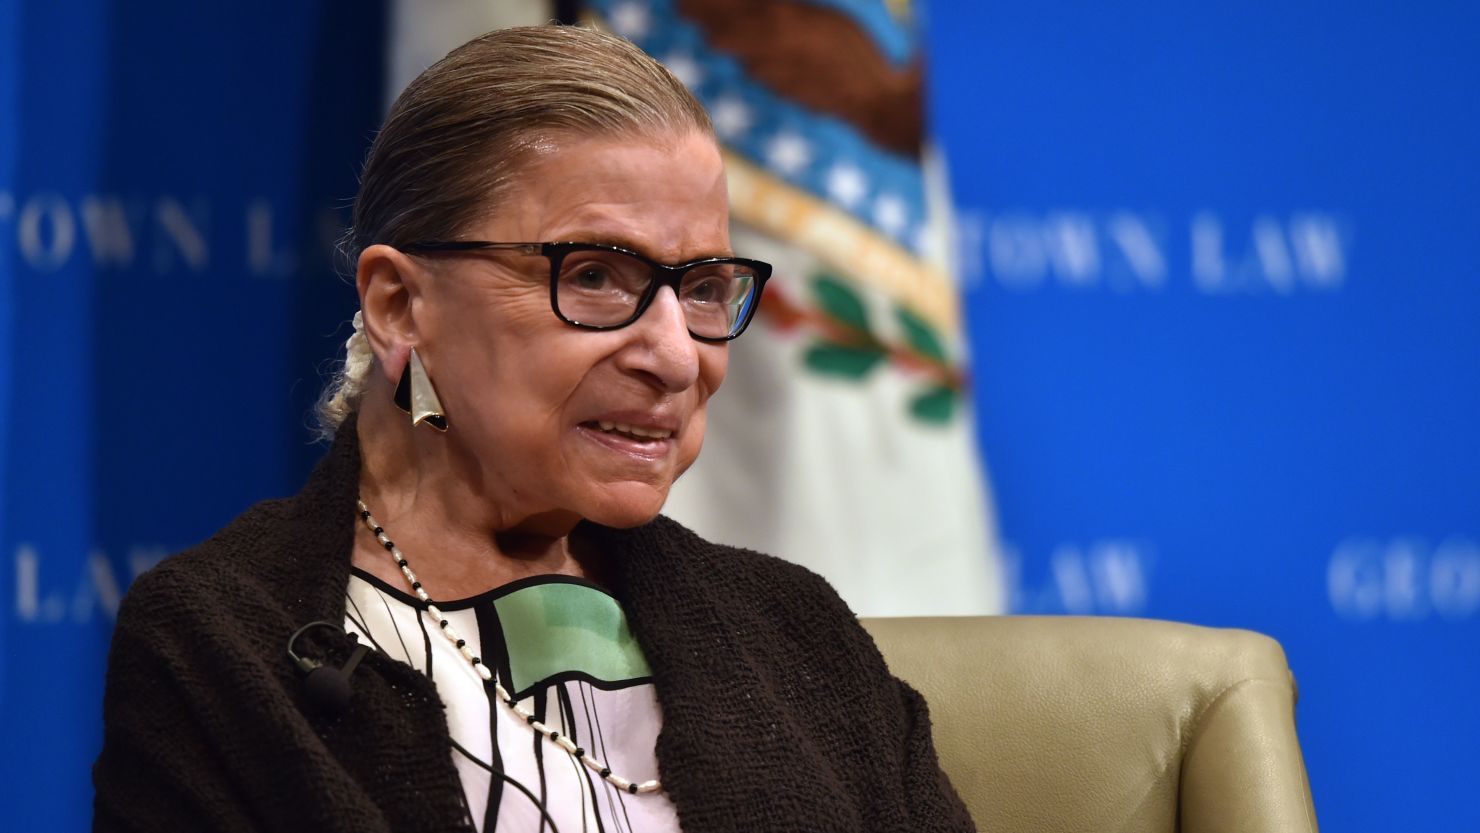 Associate Justice of the Supreme Court Ruth Bader Ginsburg gestures as she speaks to Georgetown University law students in Washington, DC on September 20, 2017.  